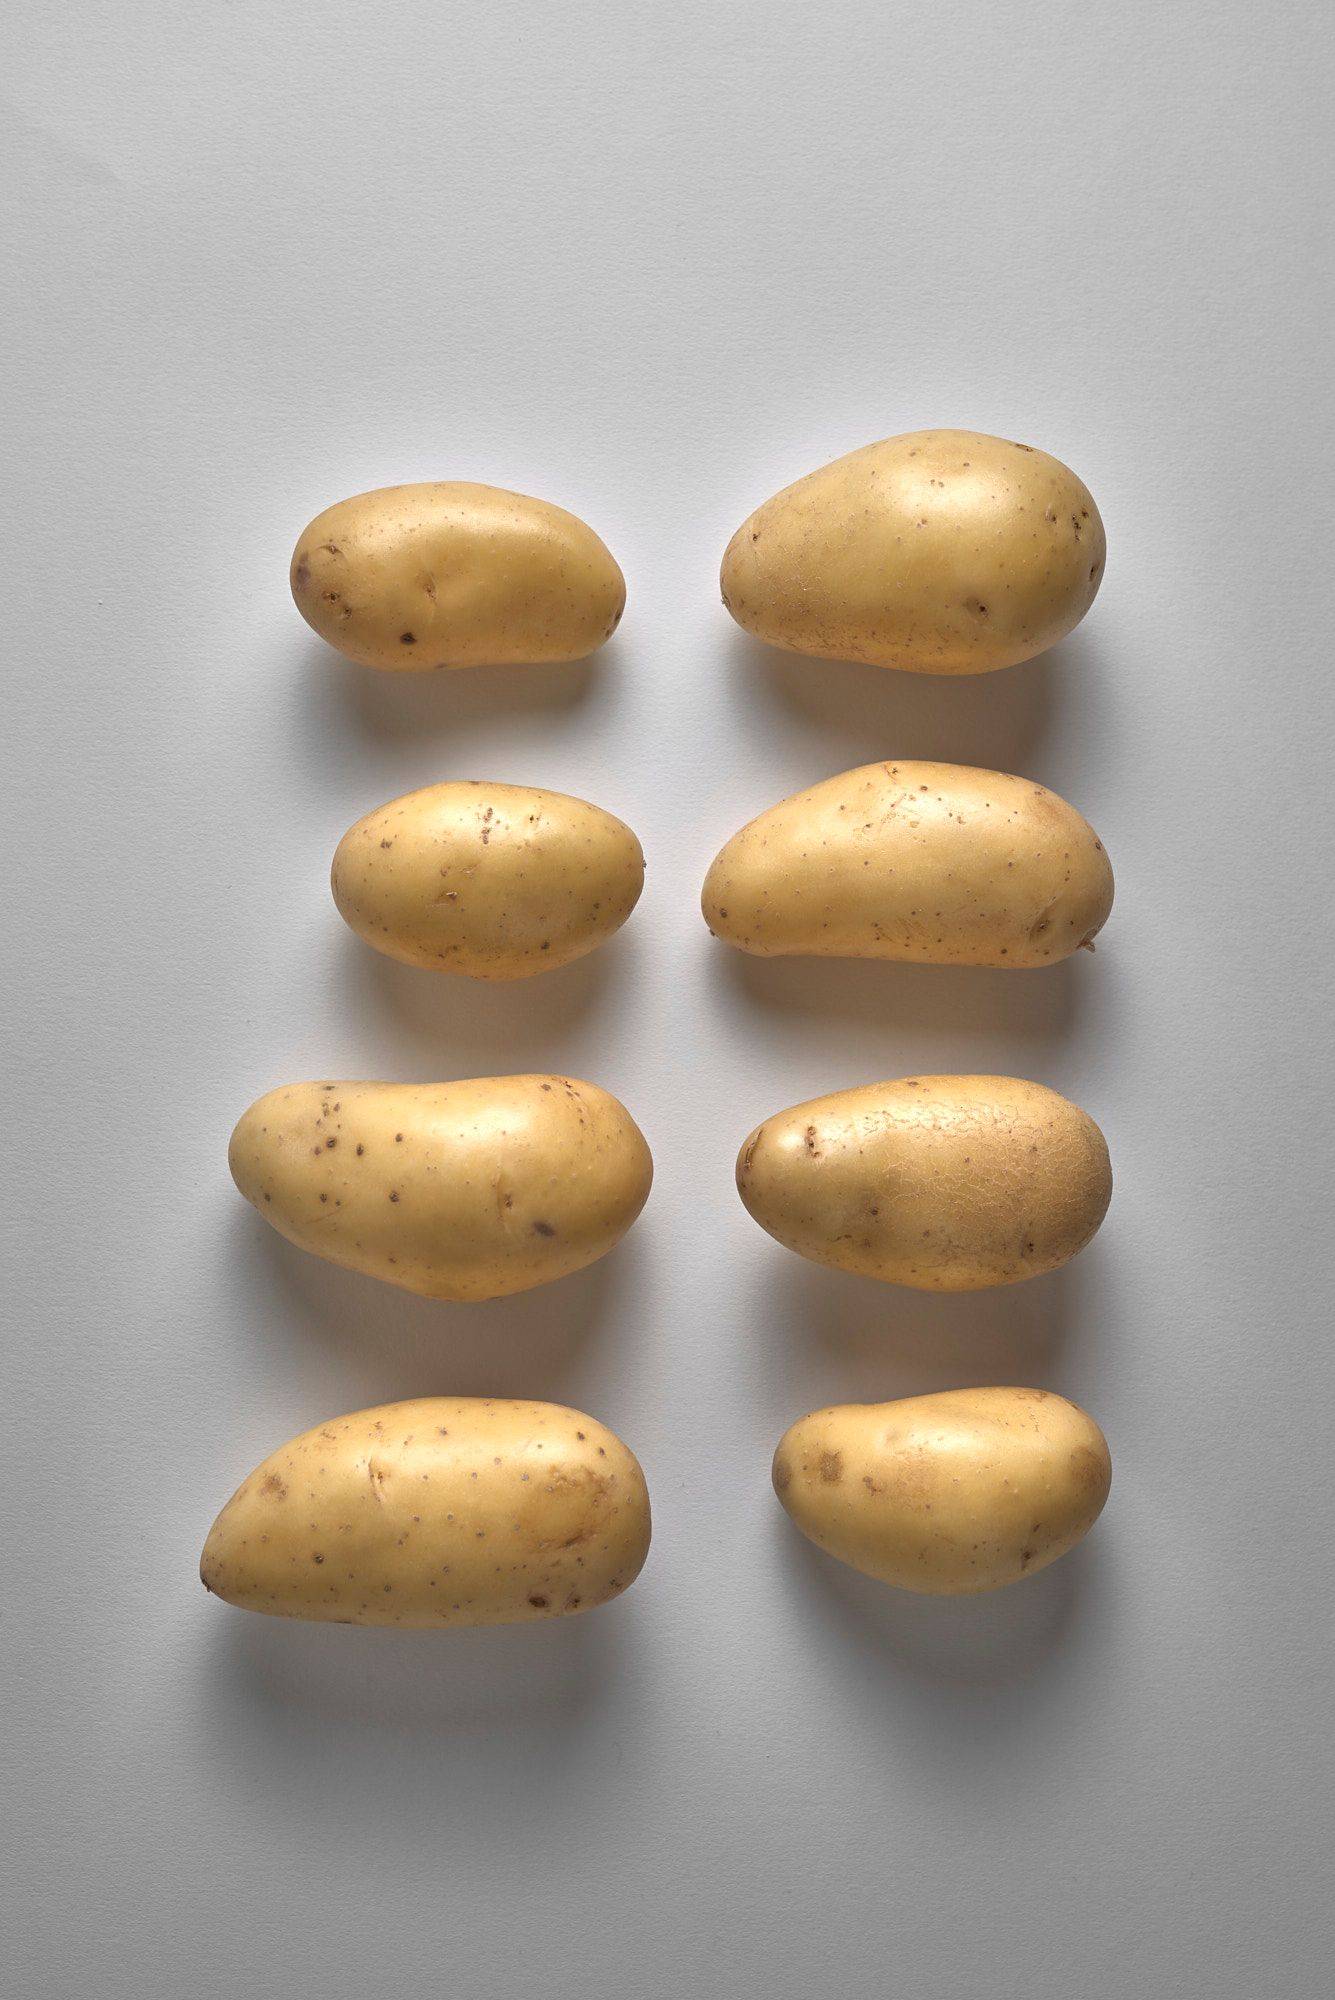 eight potatoes in a row on white background